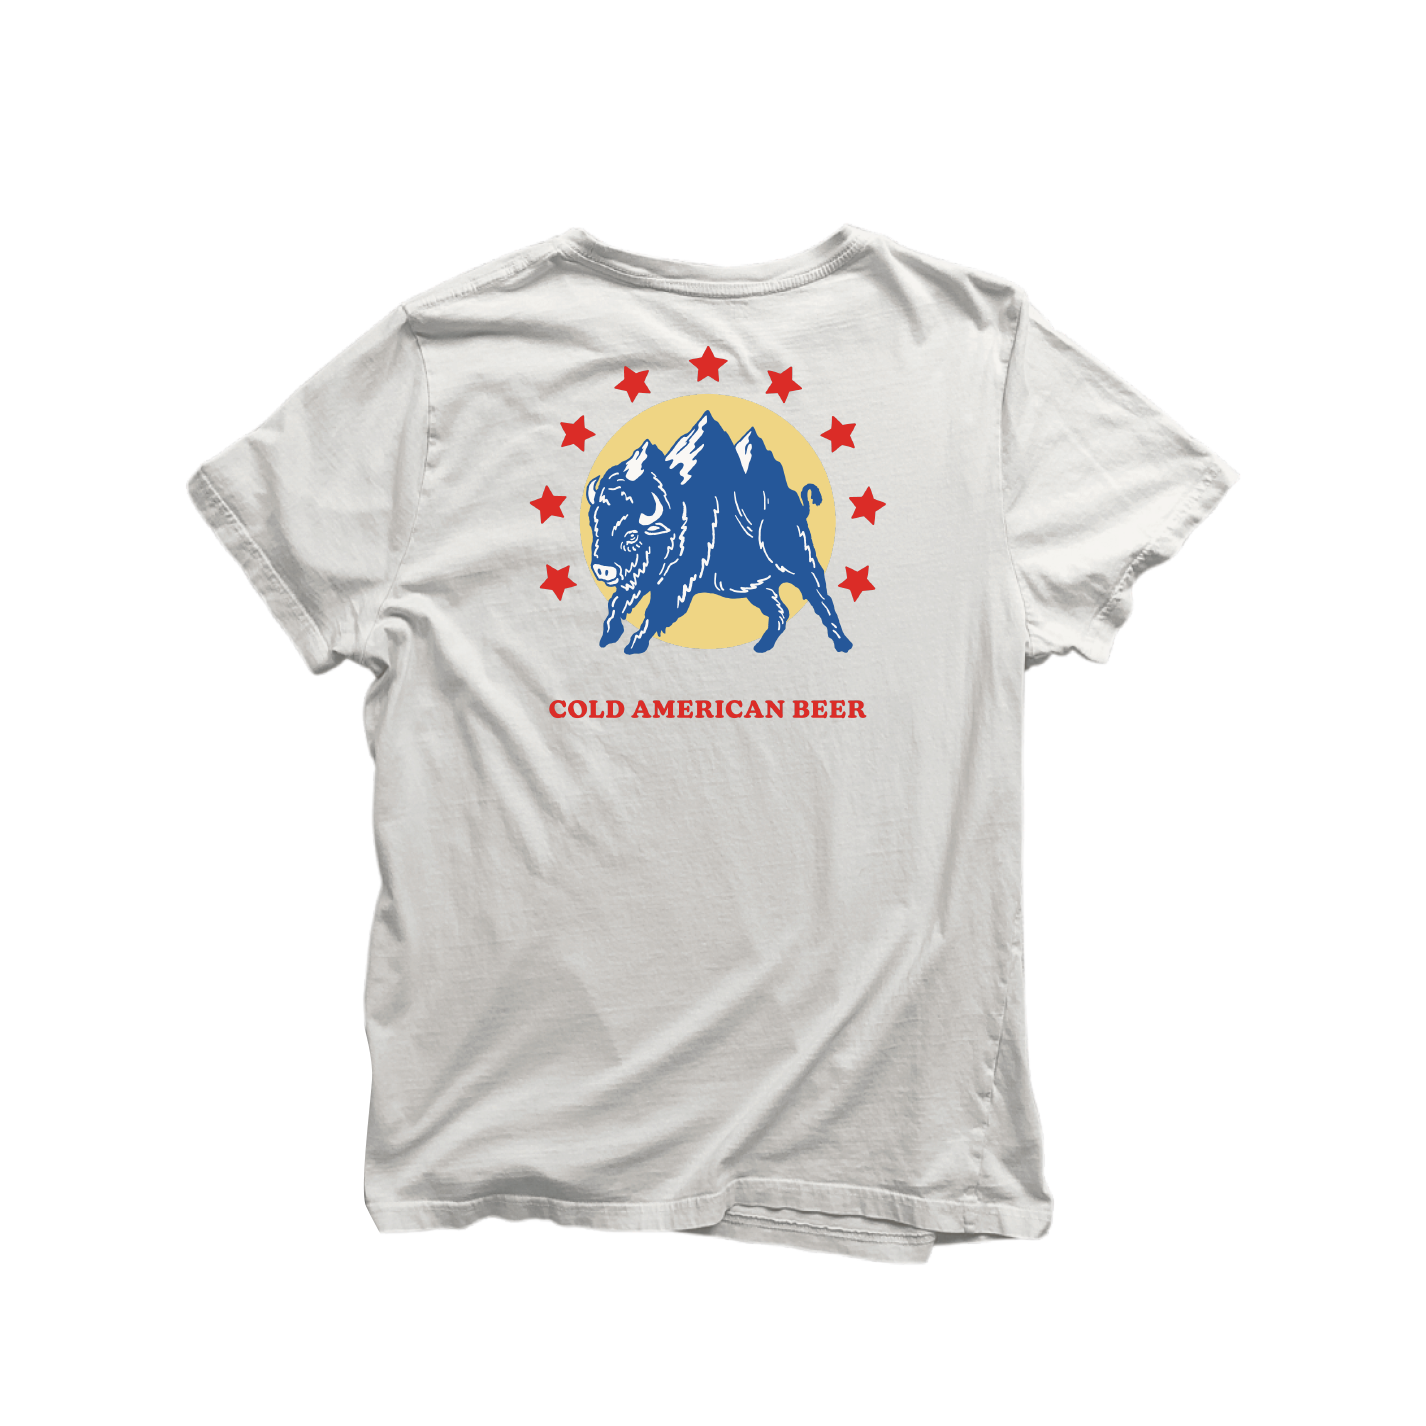 Back view of white tee shirt with red stars a buffalo with mountain ridges onand text that reads Cold American Beer